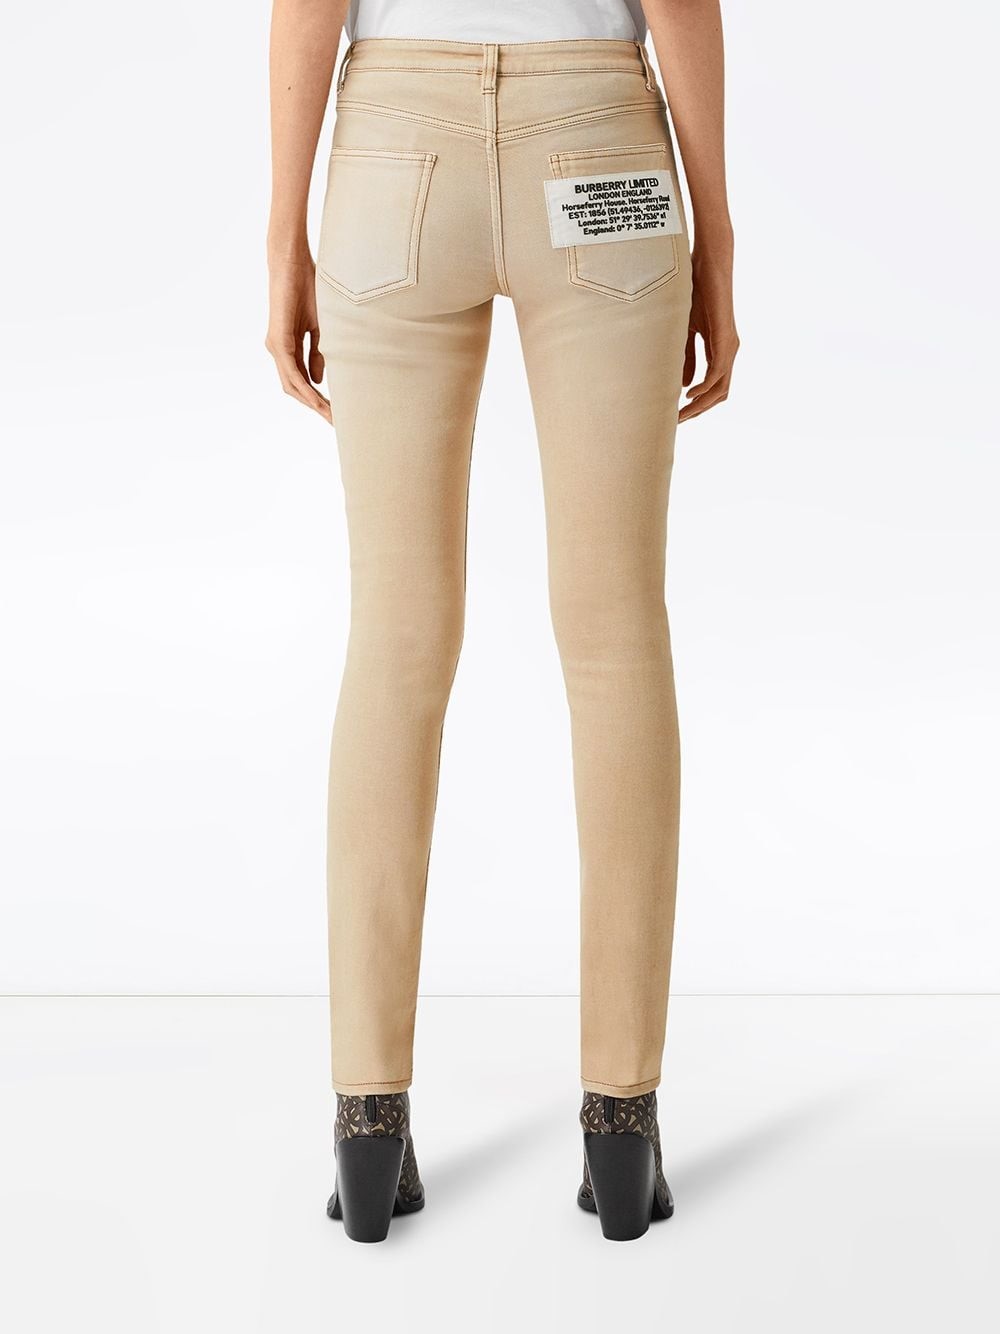 burberry FELICITY JEANS available on montiboutique.com - 35612